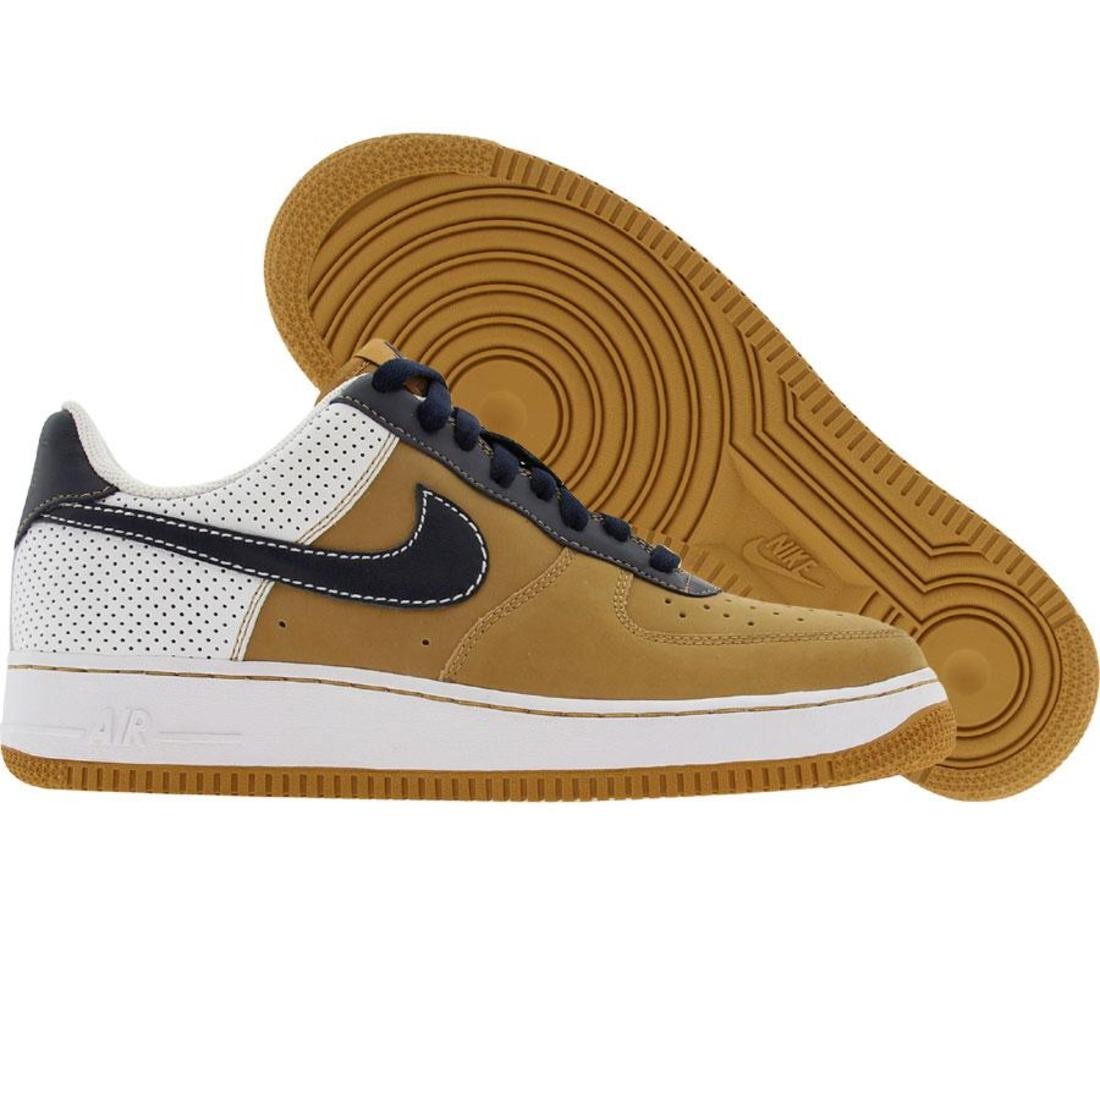 Nike Air Force 1 07 Low Philadelphia - Philly City Series Edition (wheat / obsidian / white)